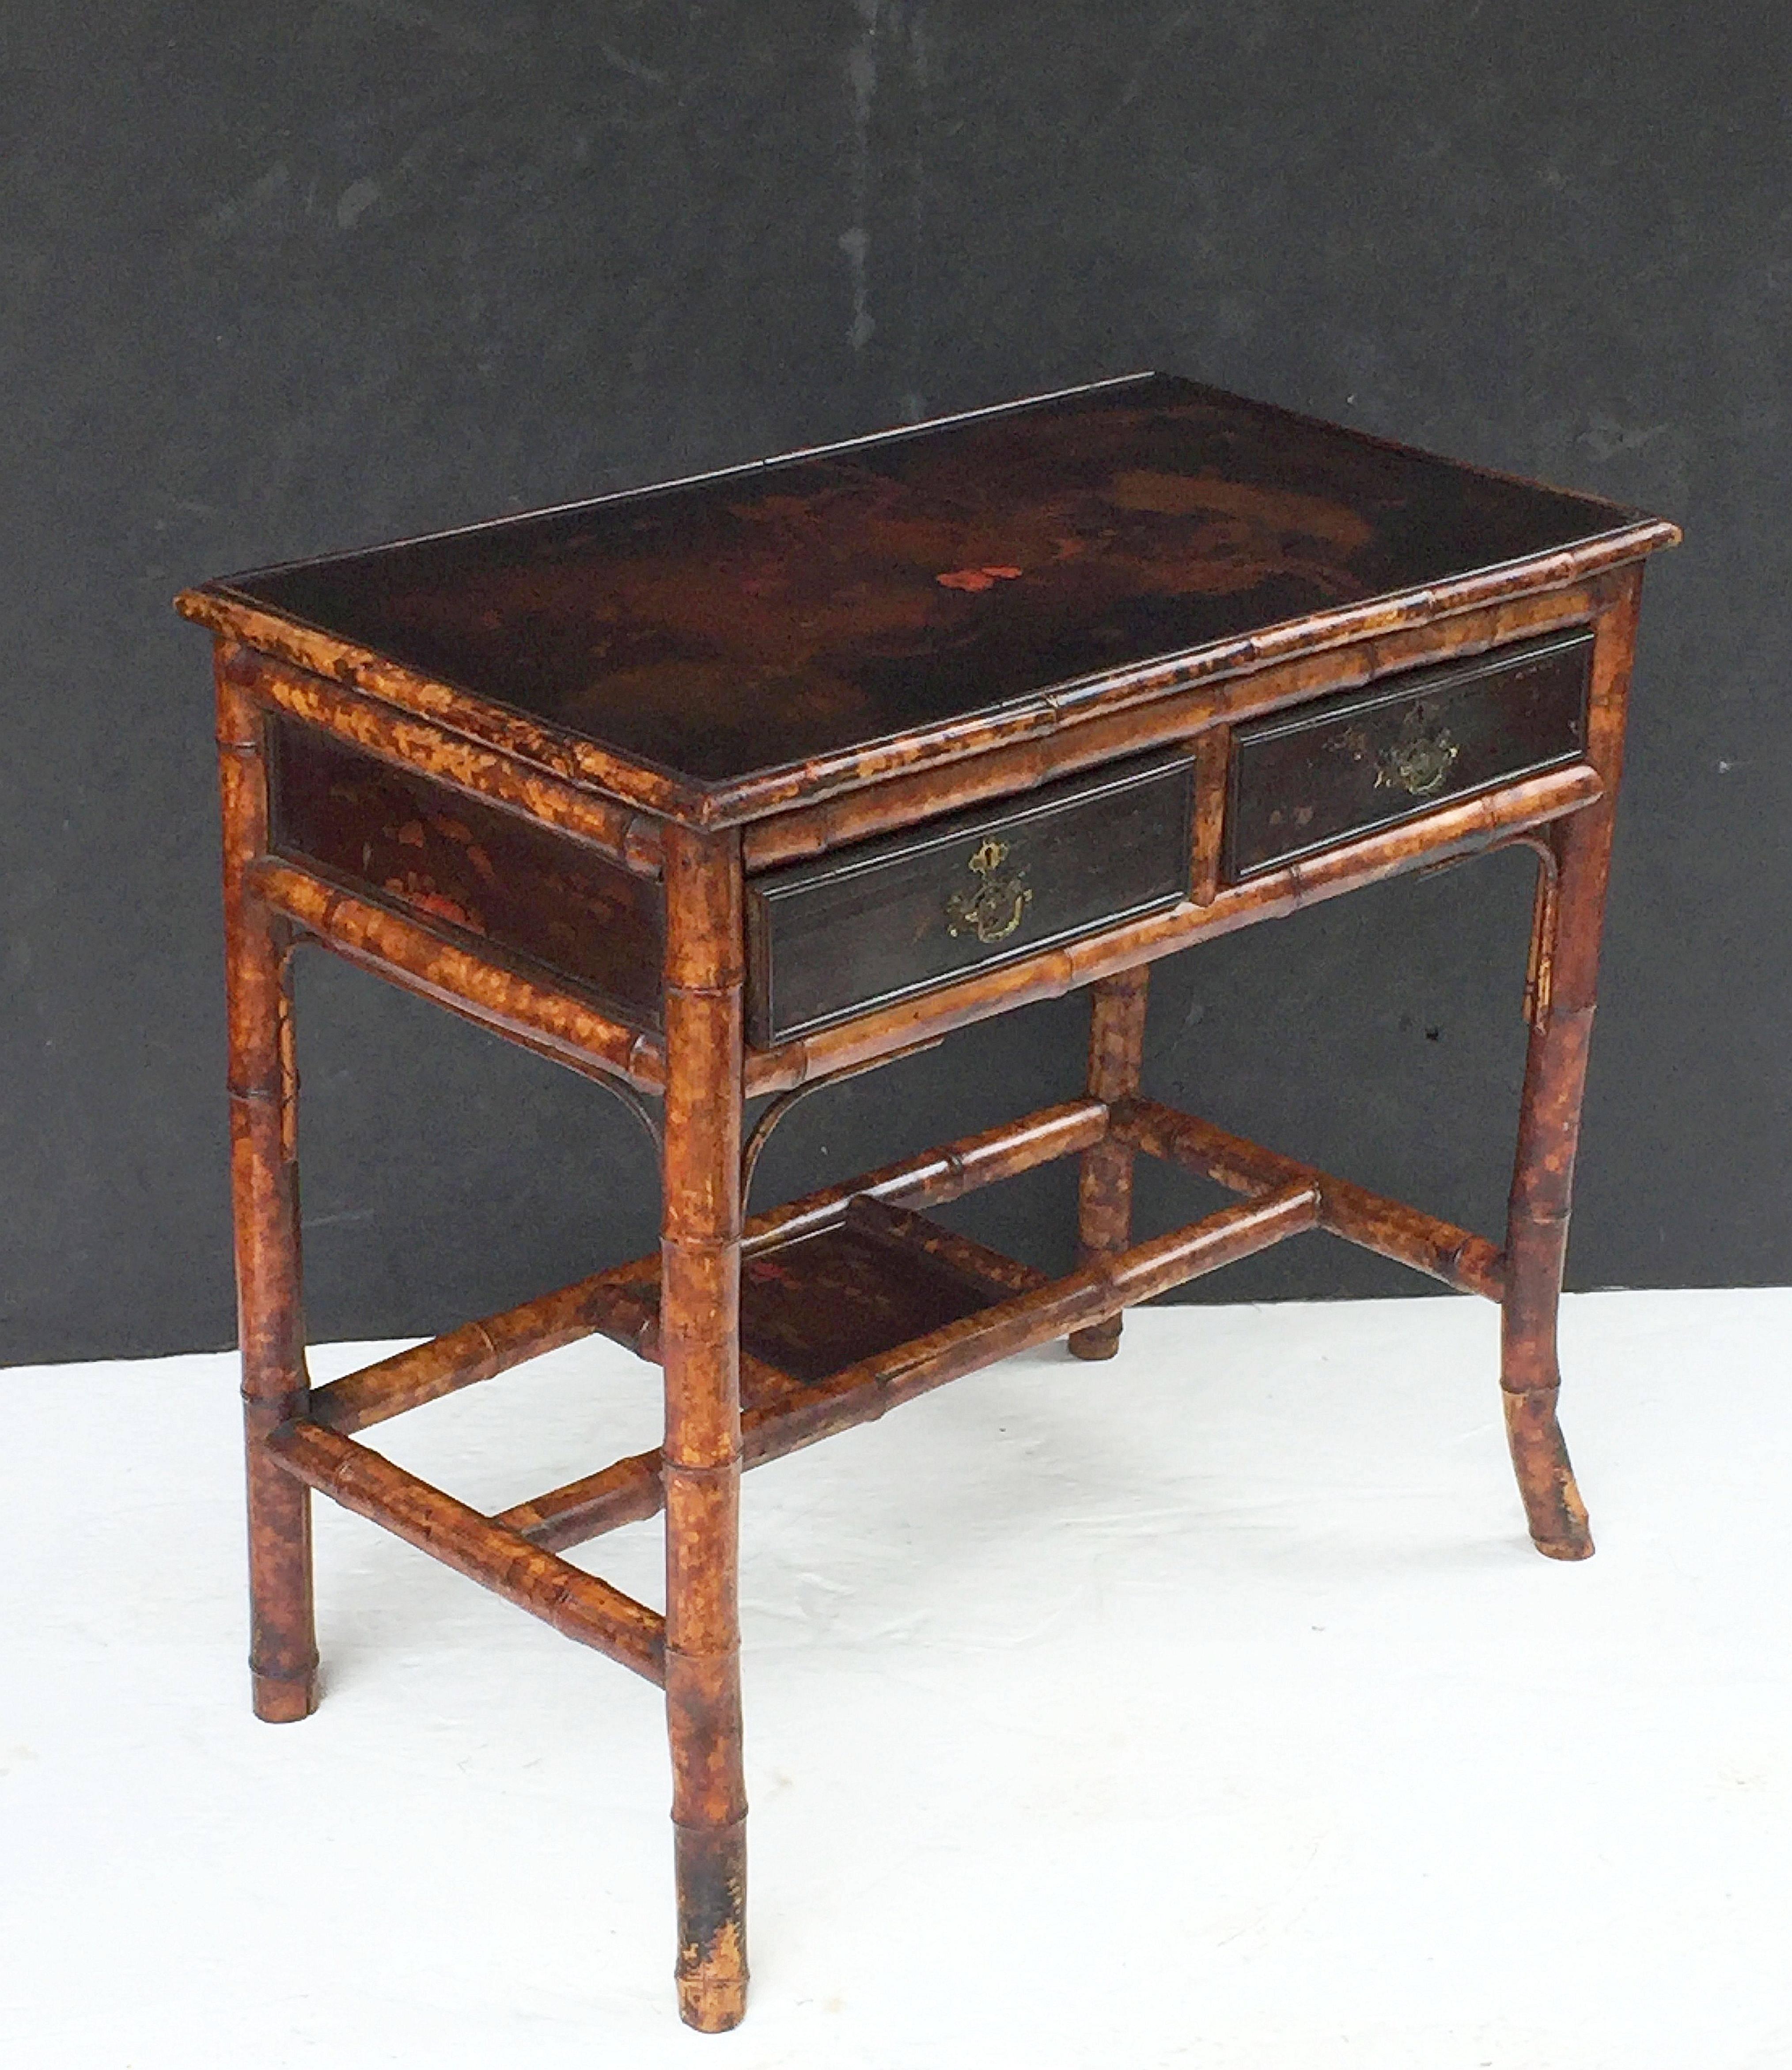 A fine English bamboo desk from the Aesthetic Movement era, circa 1870-1910, featuring a japanned lacquer top over a frieze of two drawers, each drawer with lacquer paneled front and brass hardware, and pressed paper to back.
Set upon a bamboo